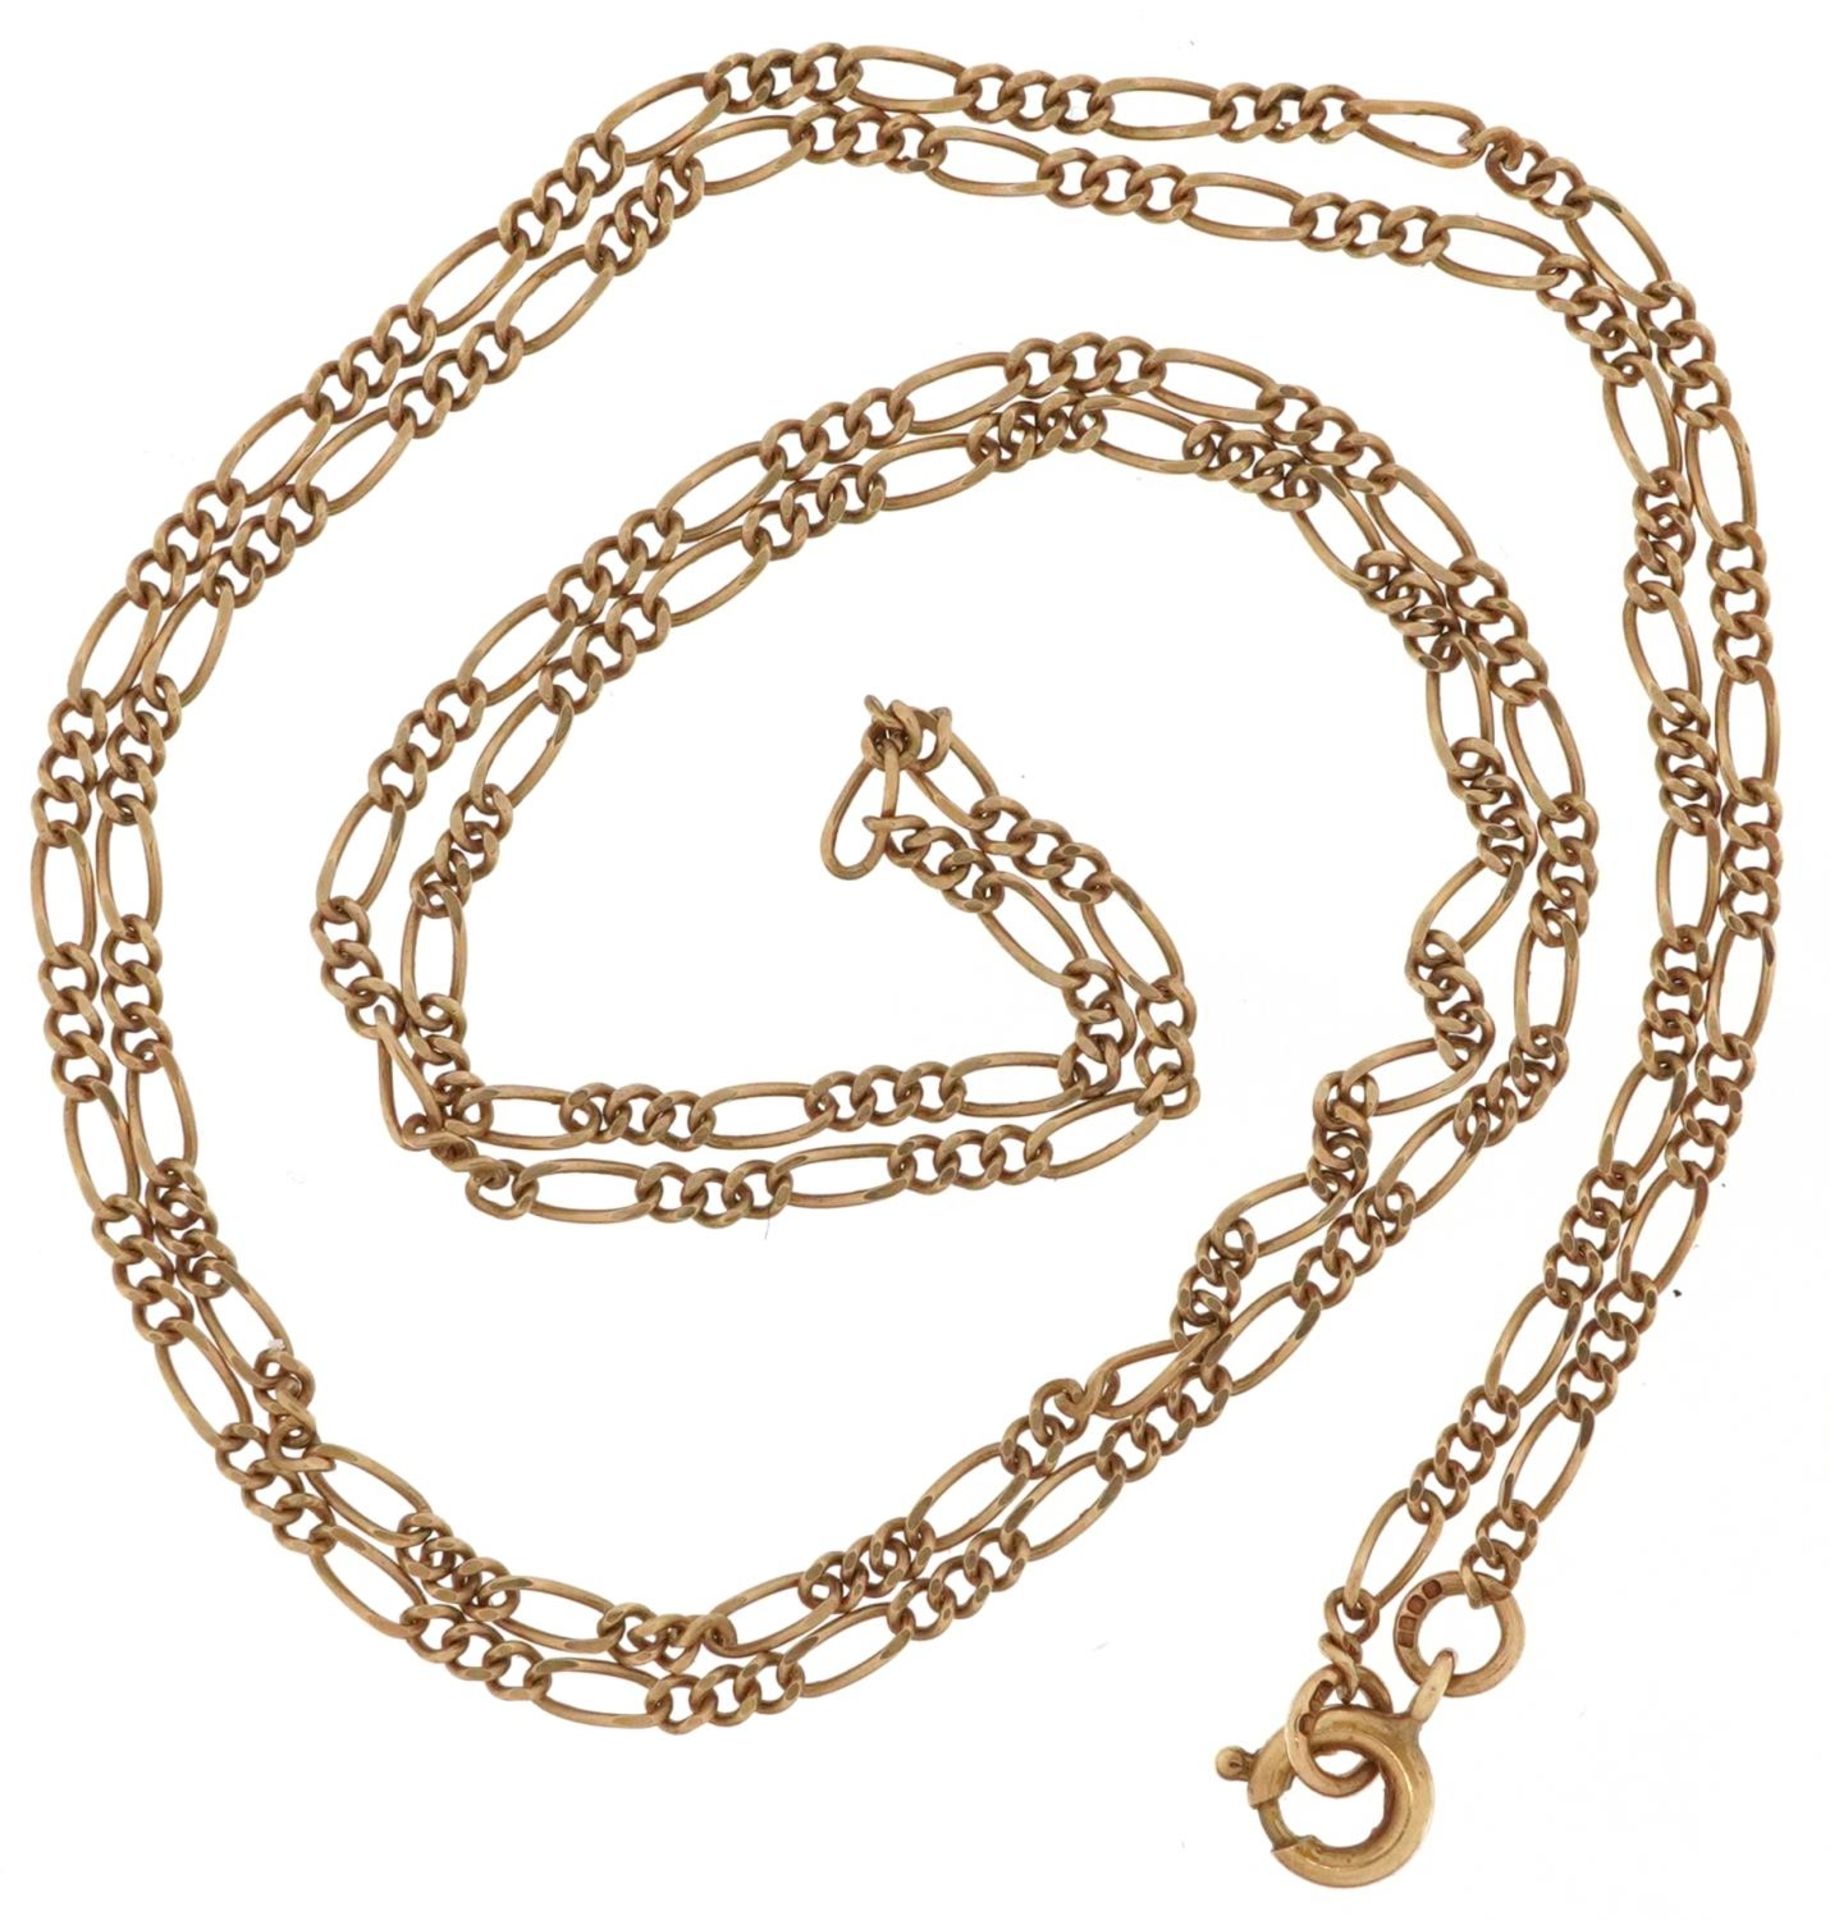 9ct gold Figaro link necklace, 56cm in length, 3.5g - Image 2 of 3